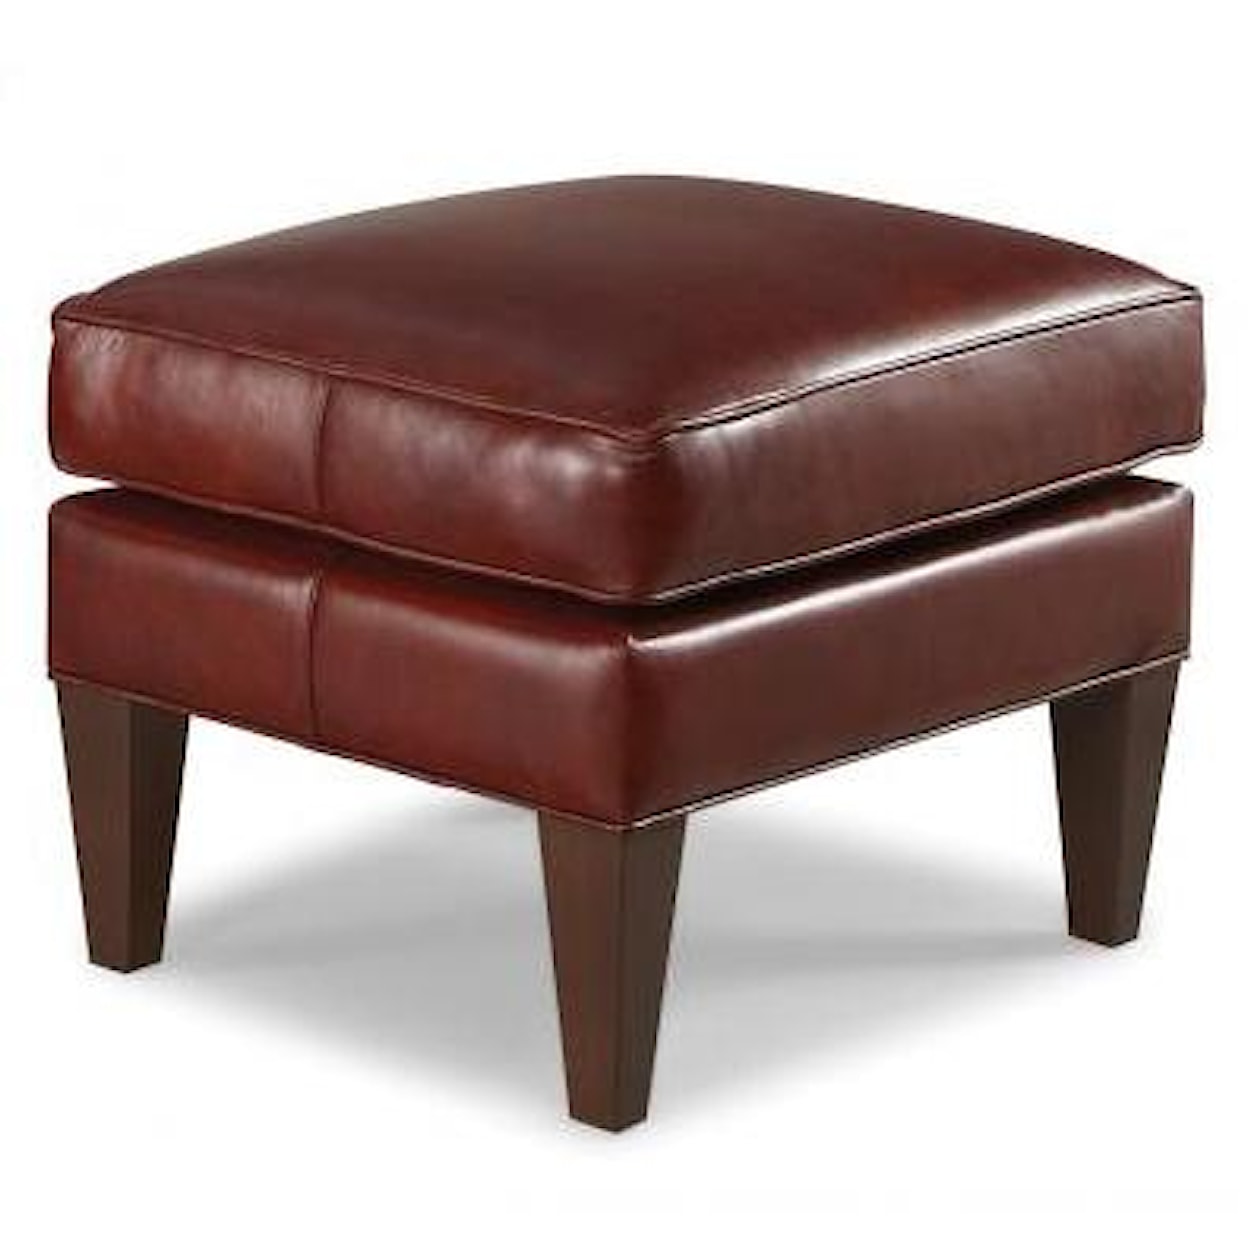 Smith Brothers Smith Brothers 505 Ottoman